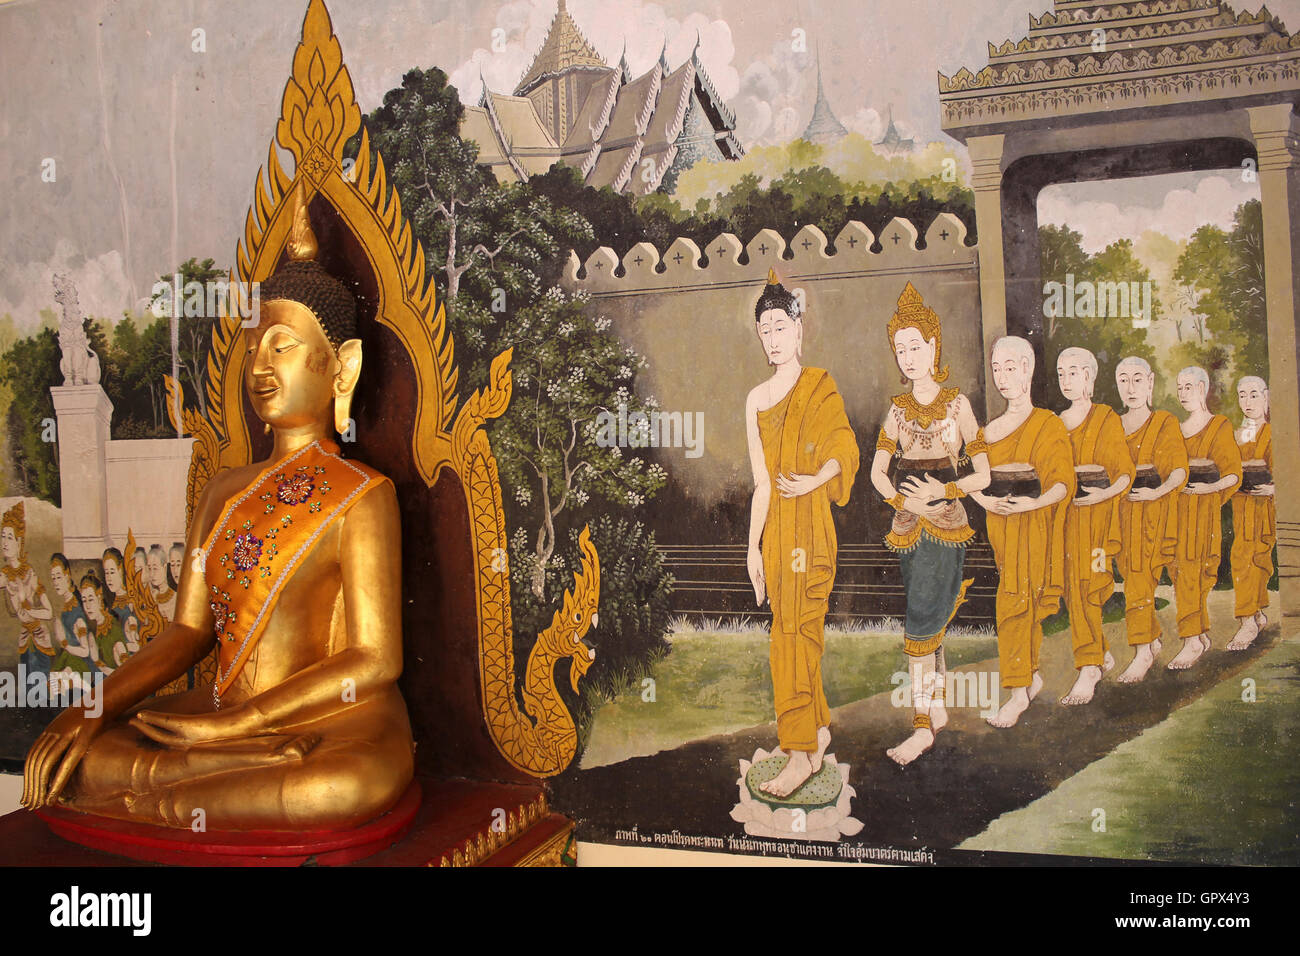 A Scene From The Life Of Buddha, Part Of A Mural In Wat Phra That Doi Suthep Temple Thailand Stock Photo